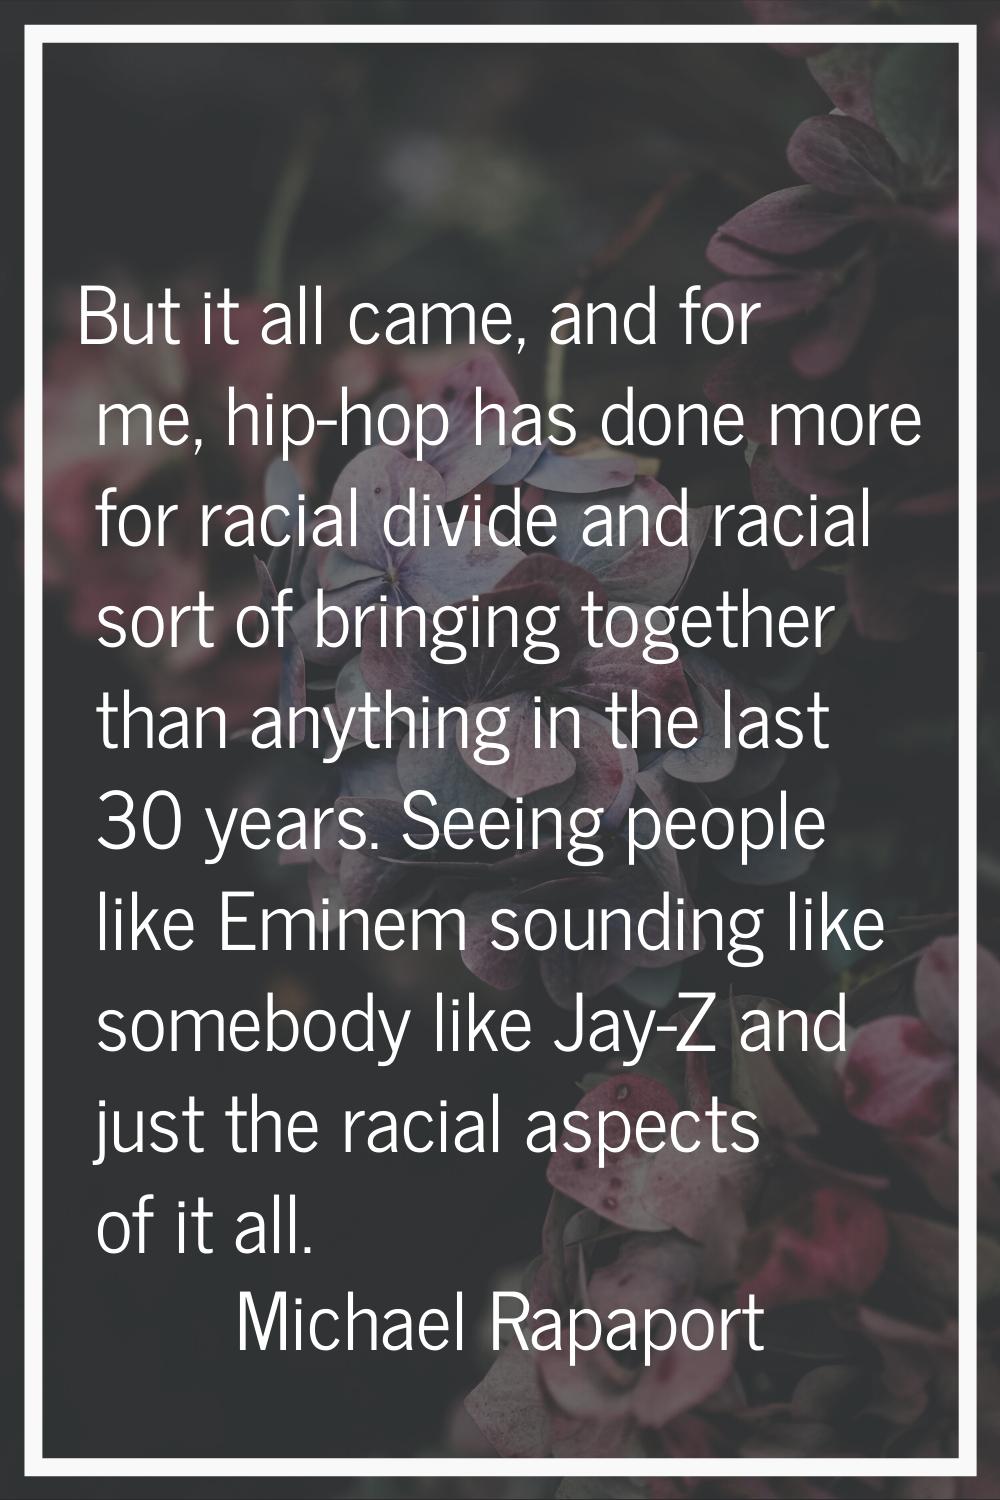 But it all came, and for me, hip-hop has done more for racial divide and racial sort of bringing to